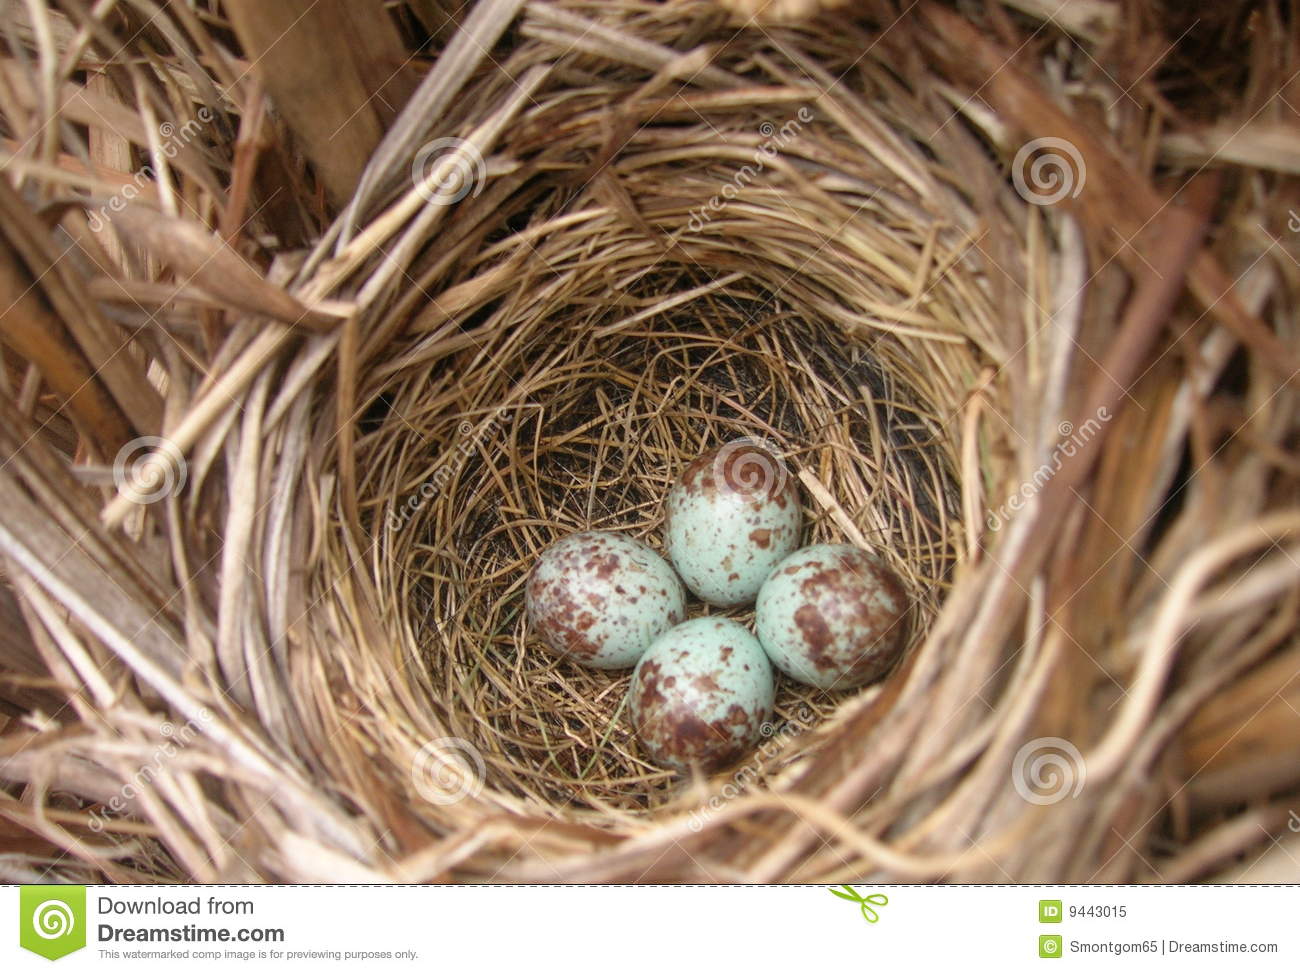 Robin S Bird Nest With Eggs Royalty Free Stock Photo   Image  9443015